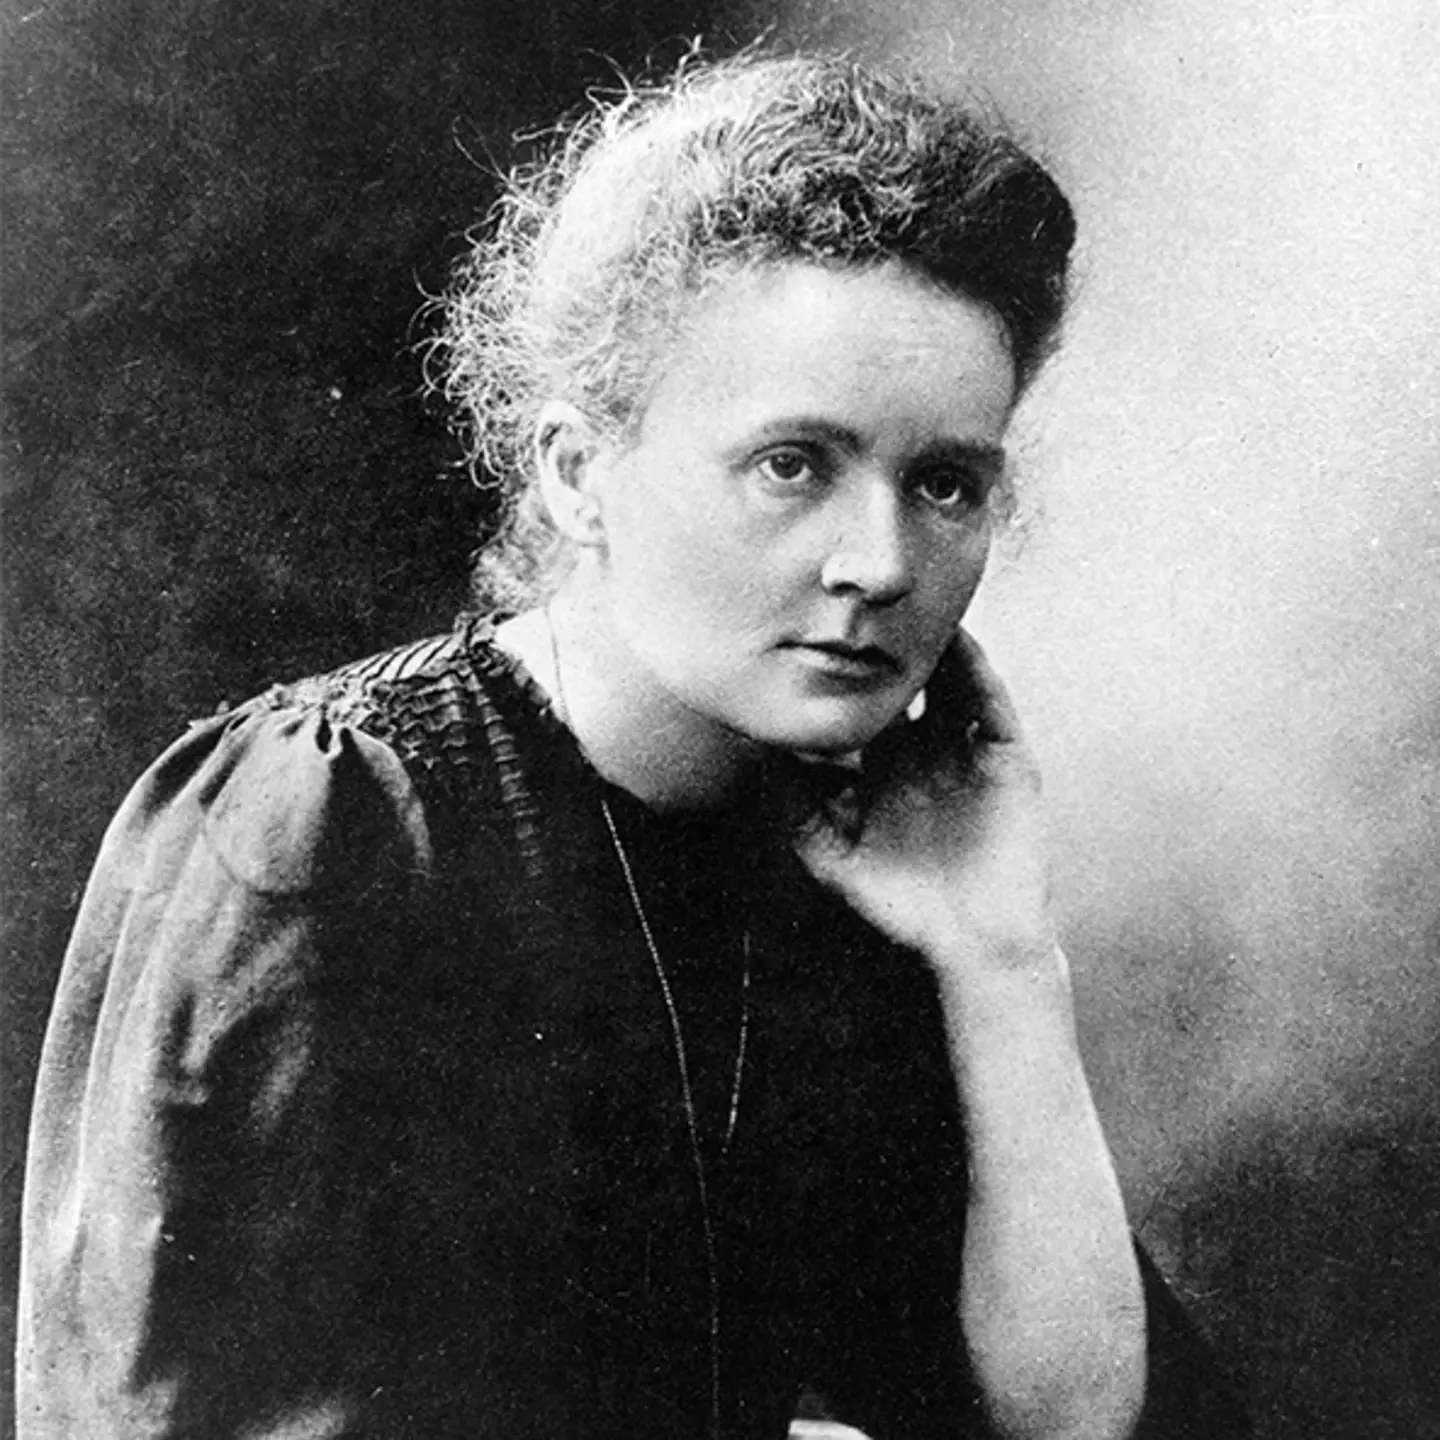 Marie Curie's body was so radioactive she was buried in a lead-lined coffin